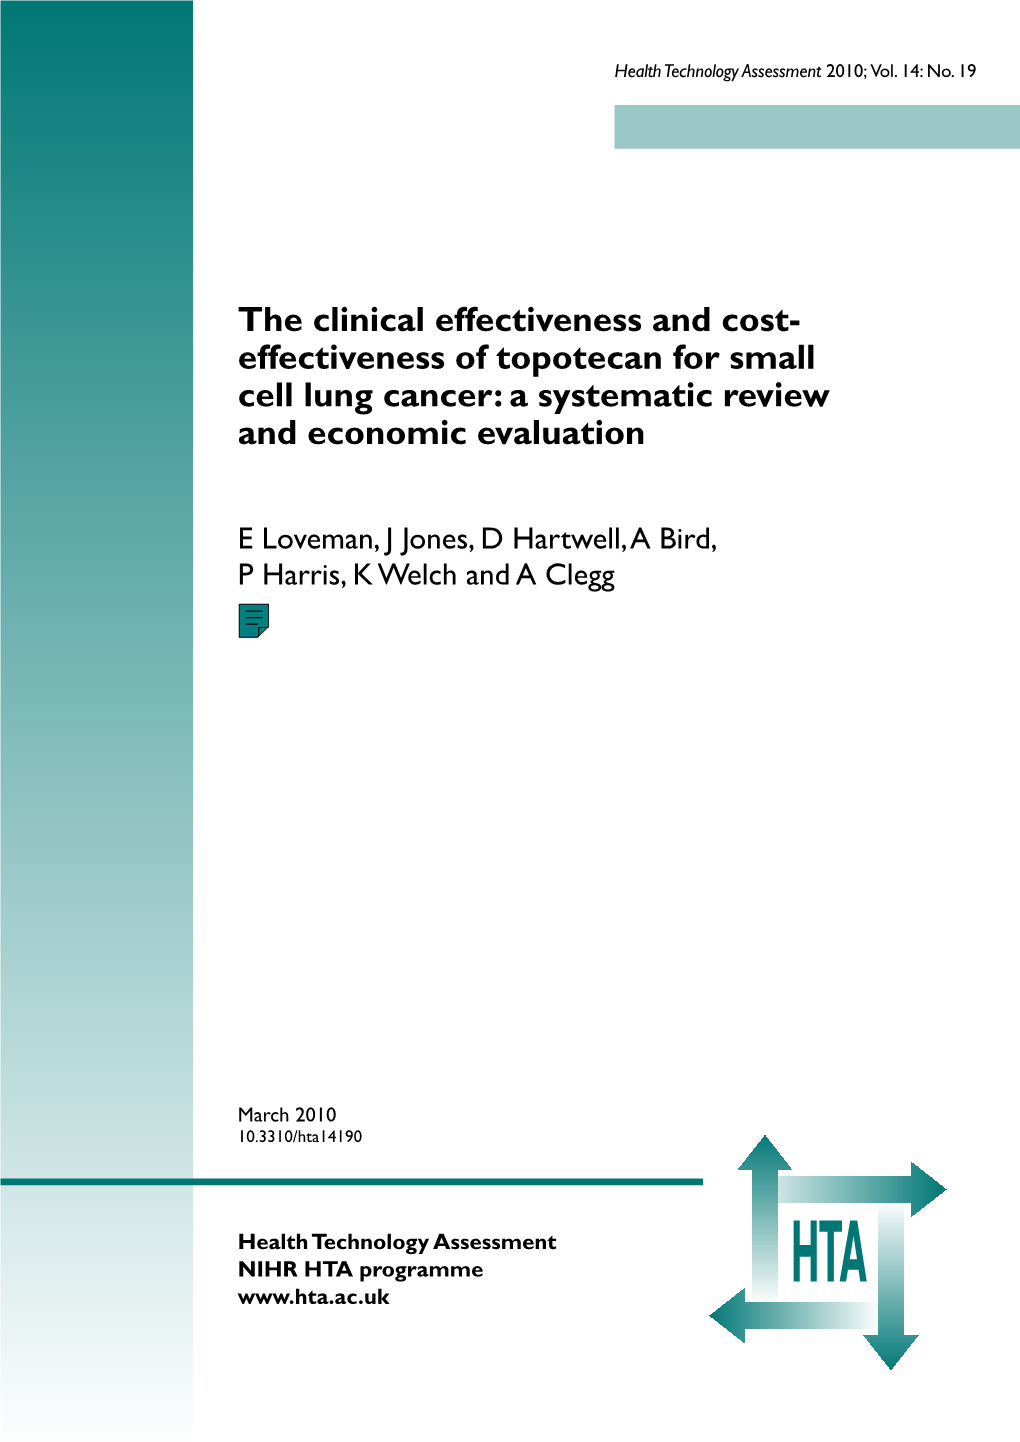 The Clinical Effectiveness and Cost-Effectiveness of Topotecan for Small Cell Lung Cancer: a Systematic Review and Economic Evaluation